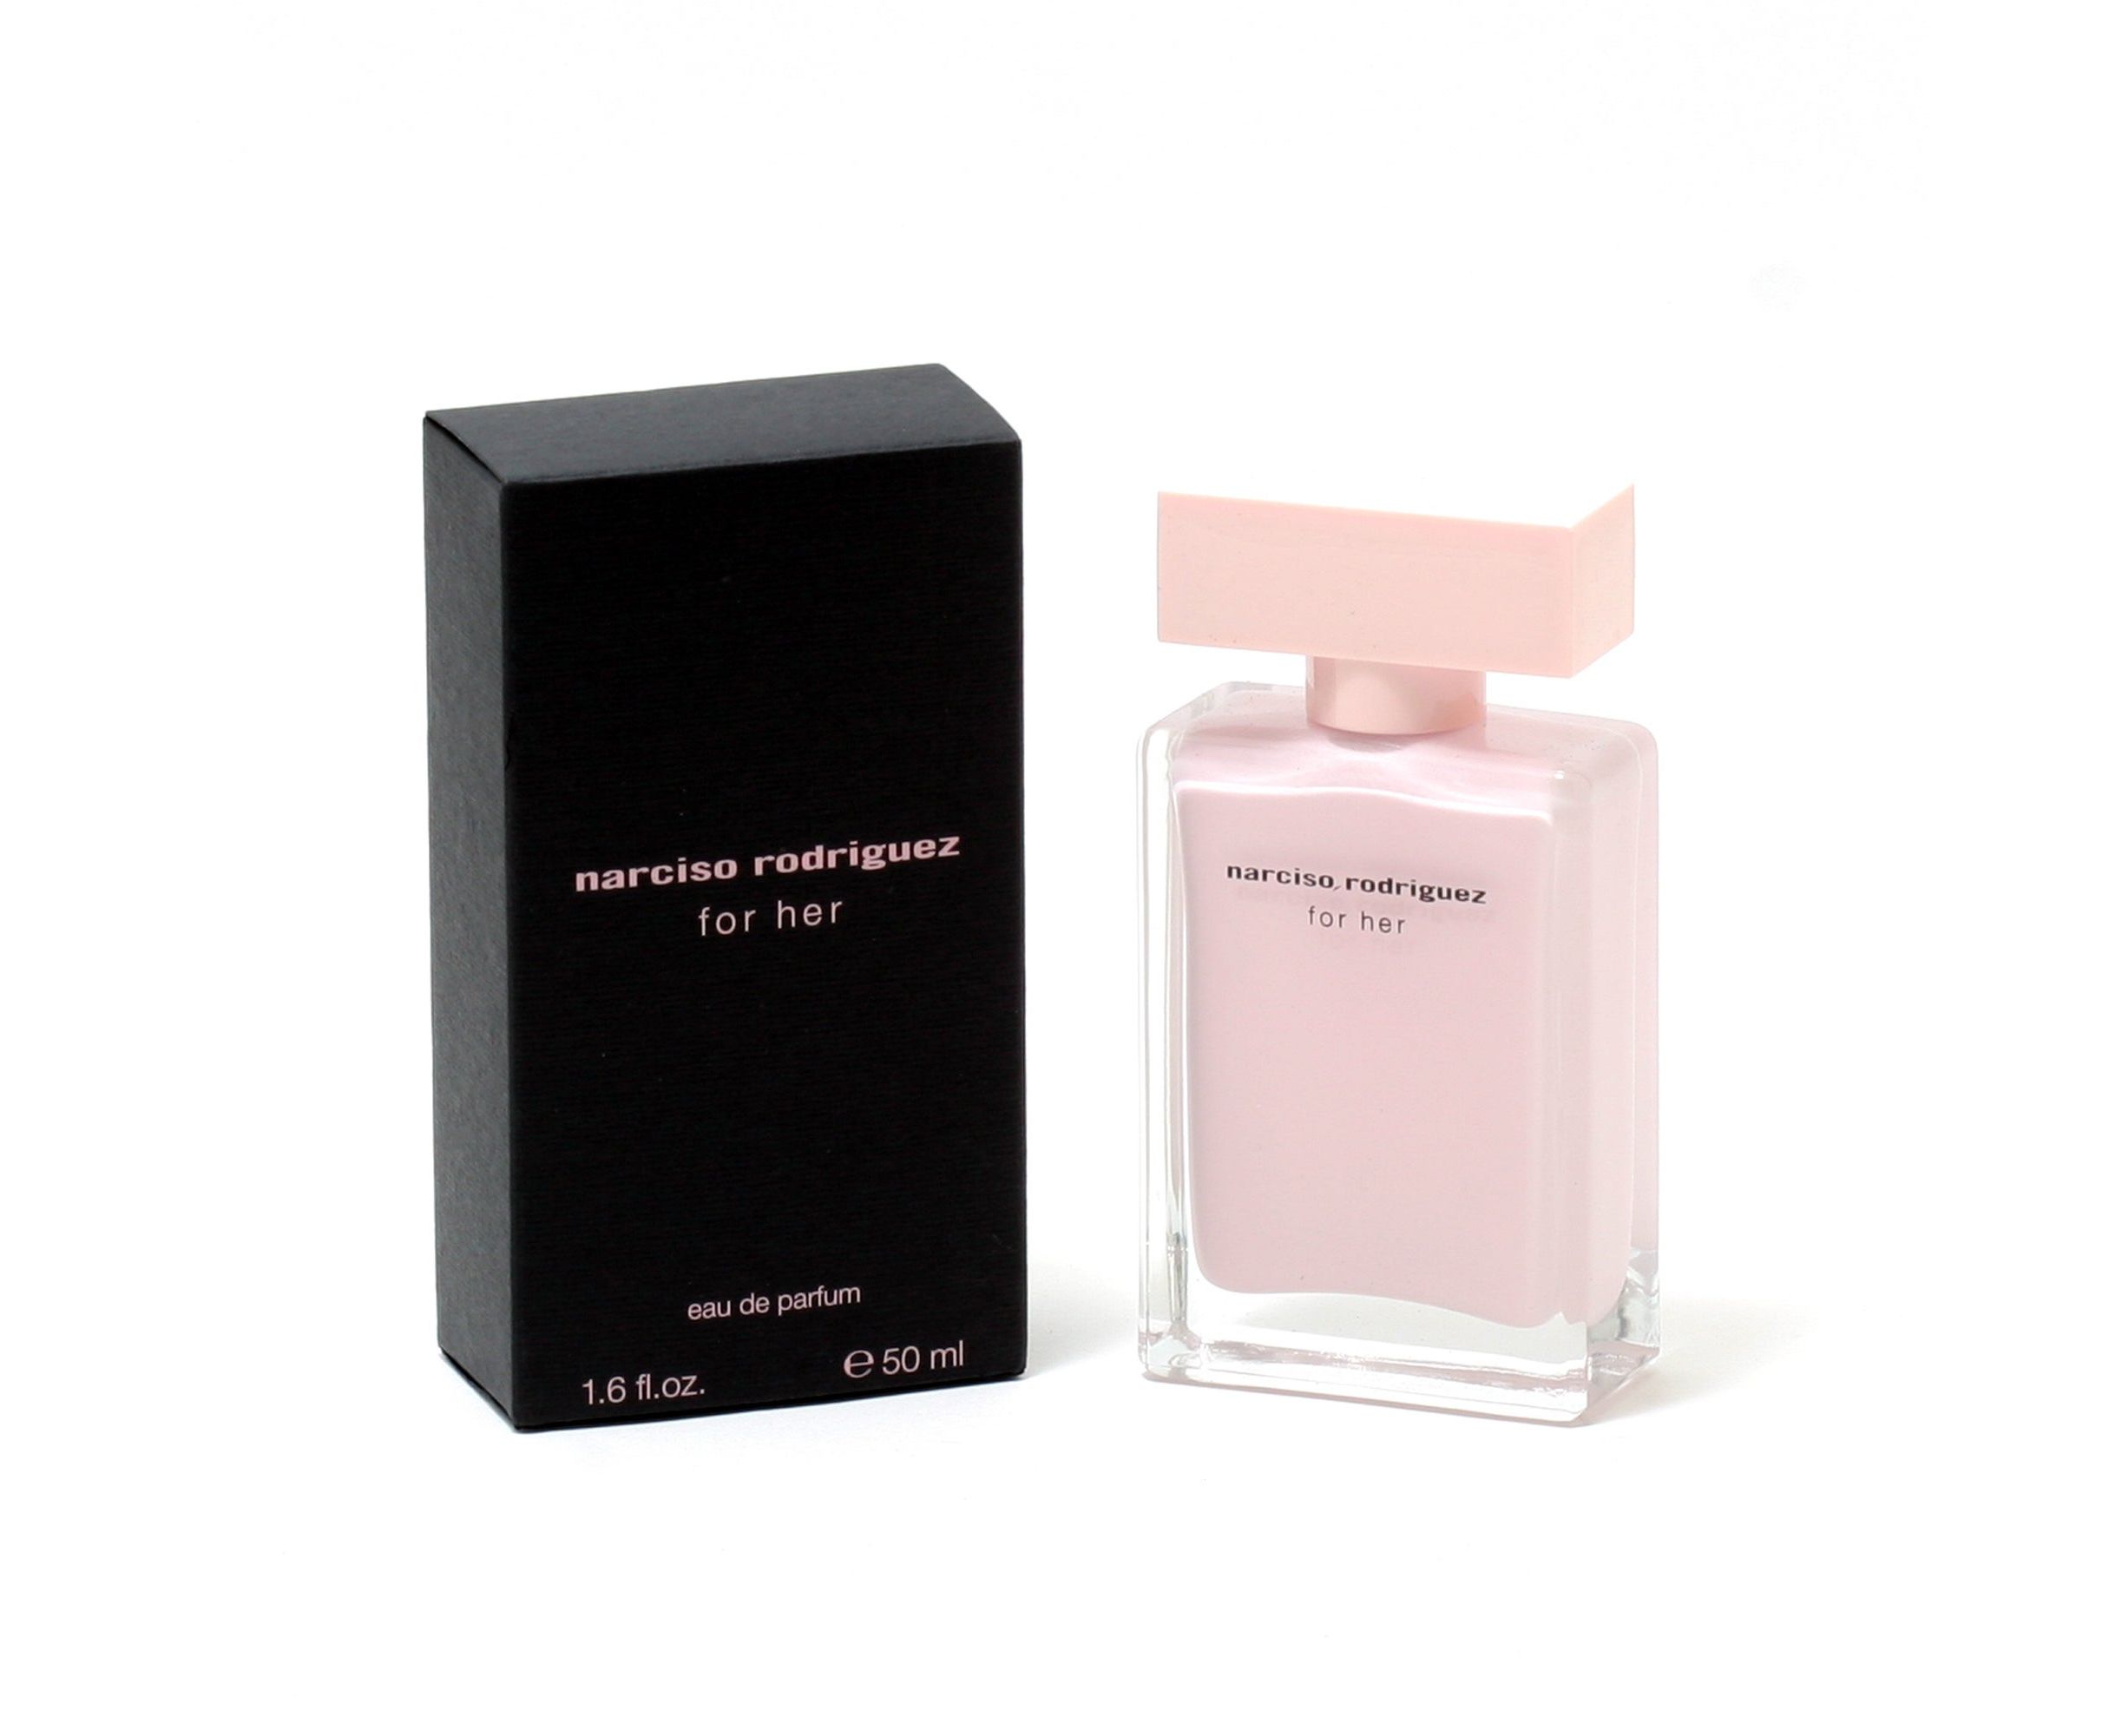 All of me narciso rodriguez. Narciso Rodriguez for her Eau de Parfum. Narciso Rodriguez for her EDP 100ml. Narciso Rodriguez for her EDP L 30ml. Narciso Rodriguez 50 мл for her.